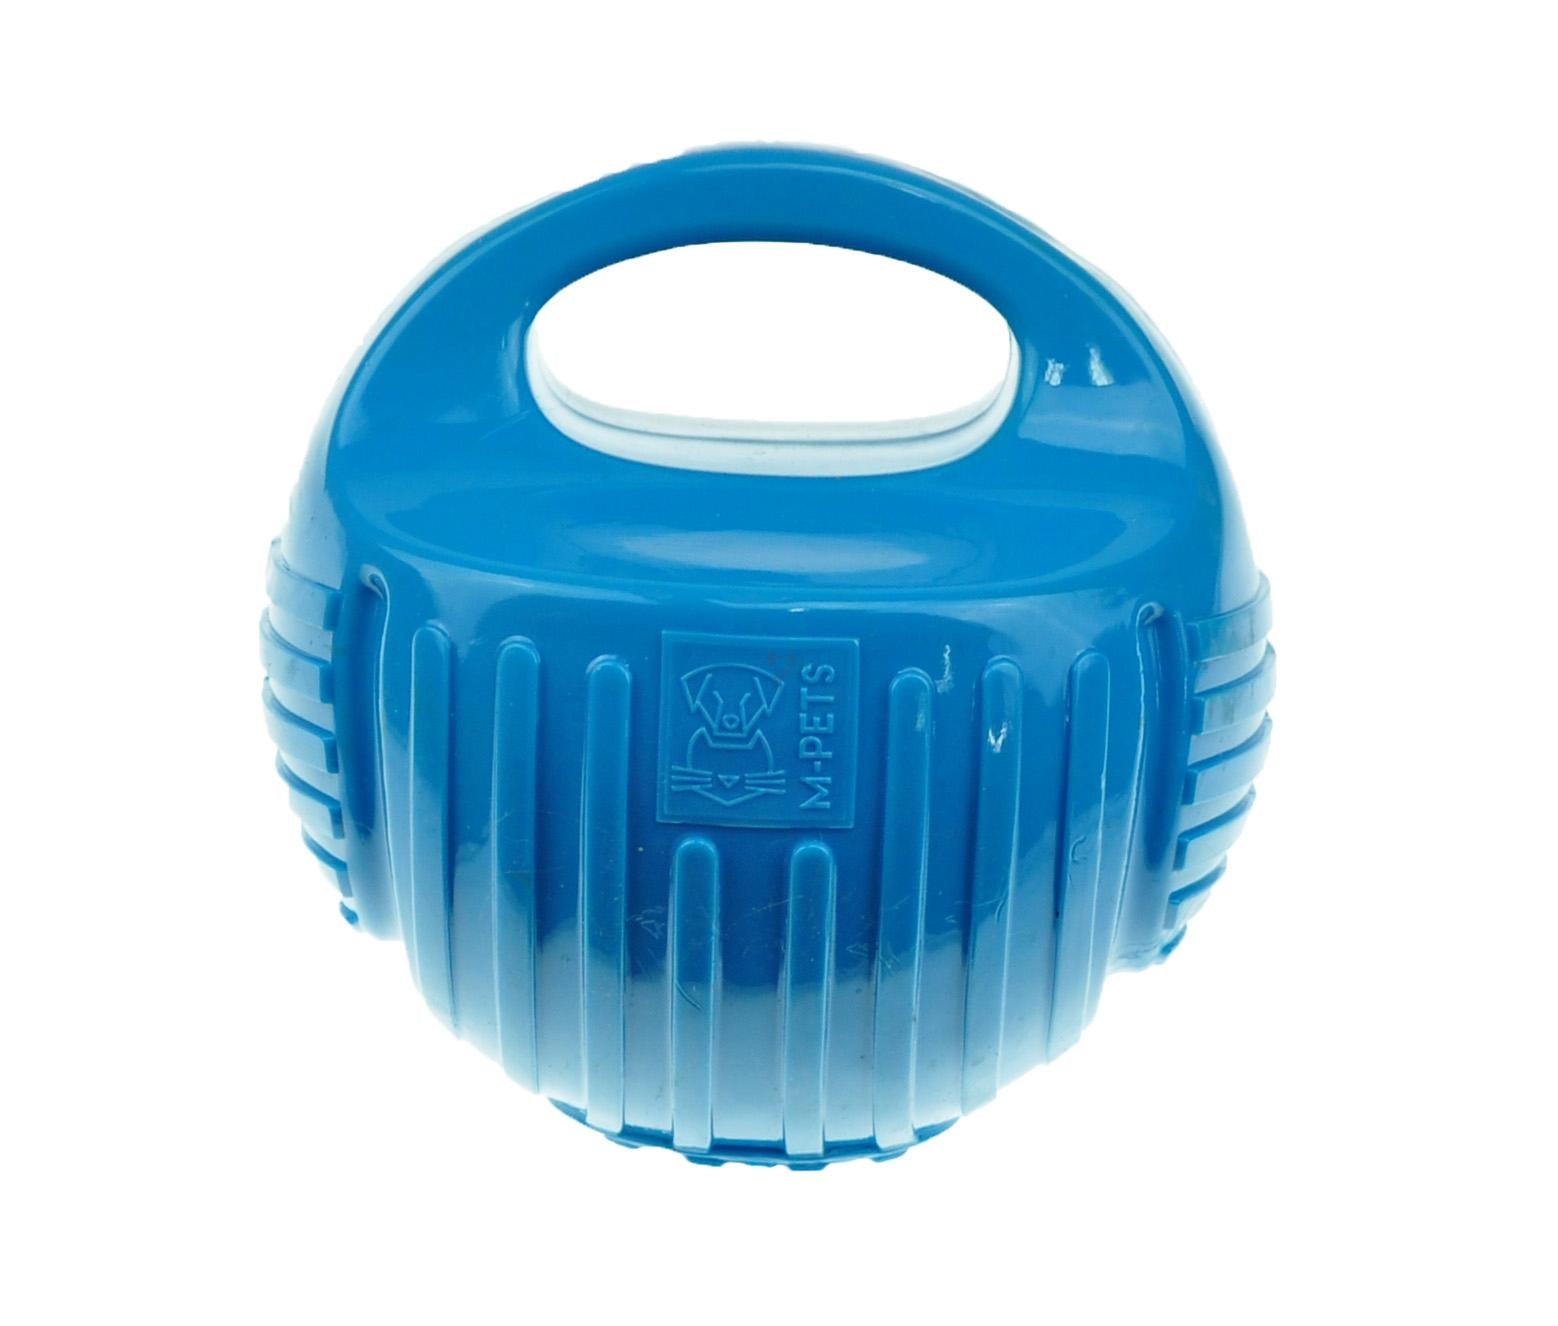 M-PETS_10629217_ARCO Ball_Blue_M_without packaging